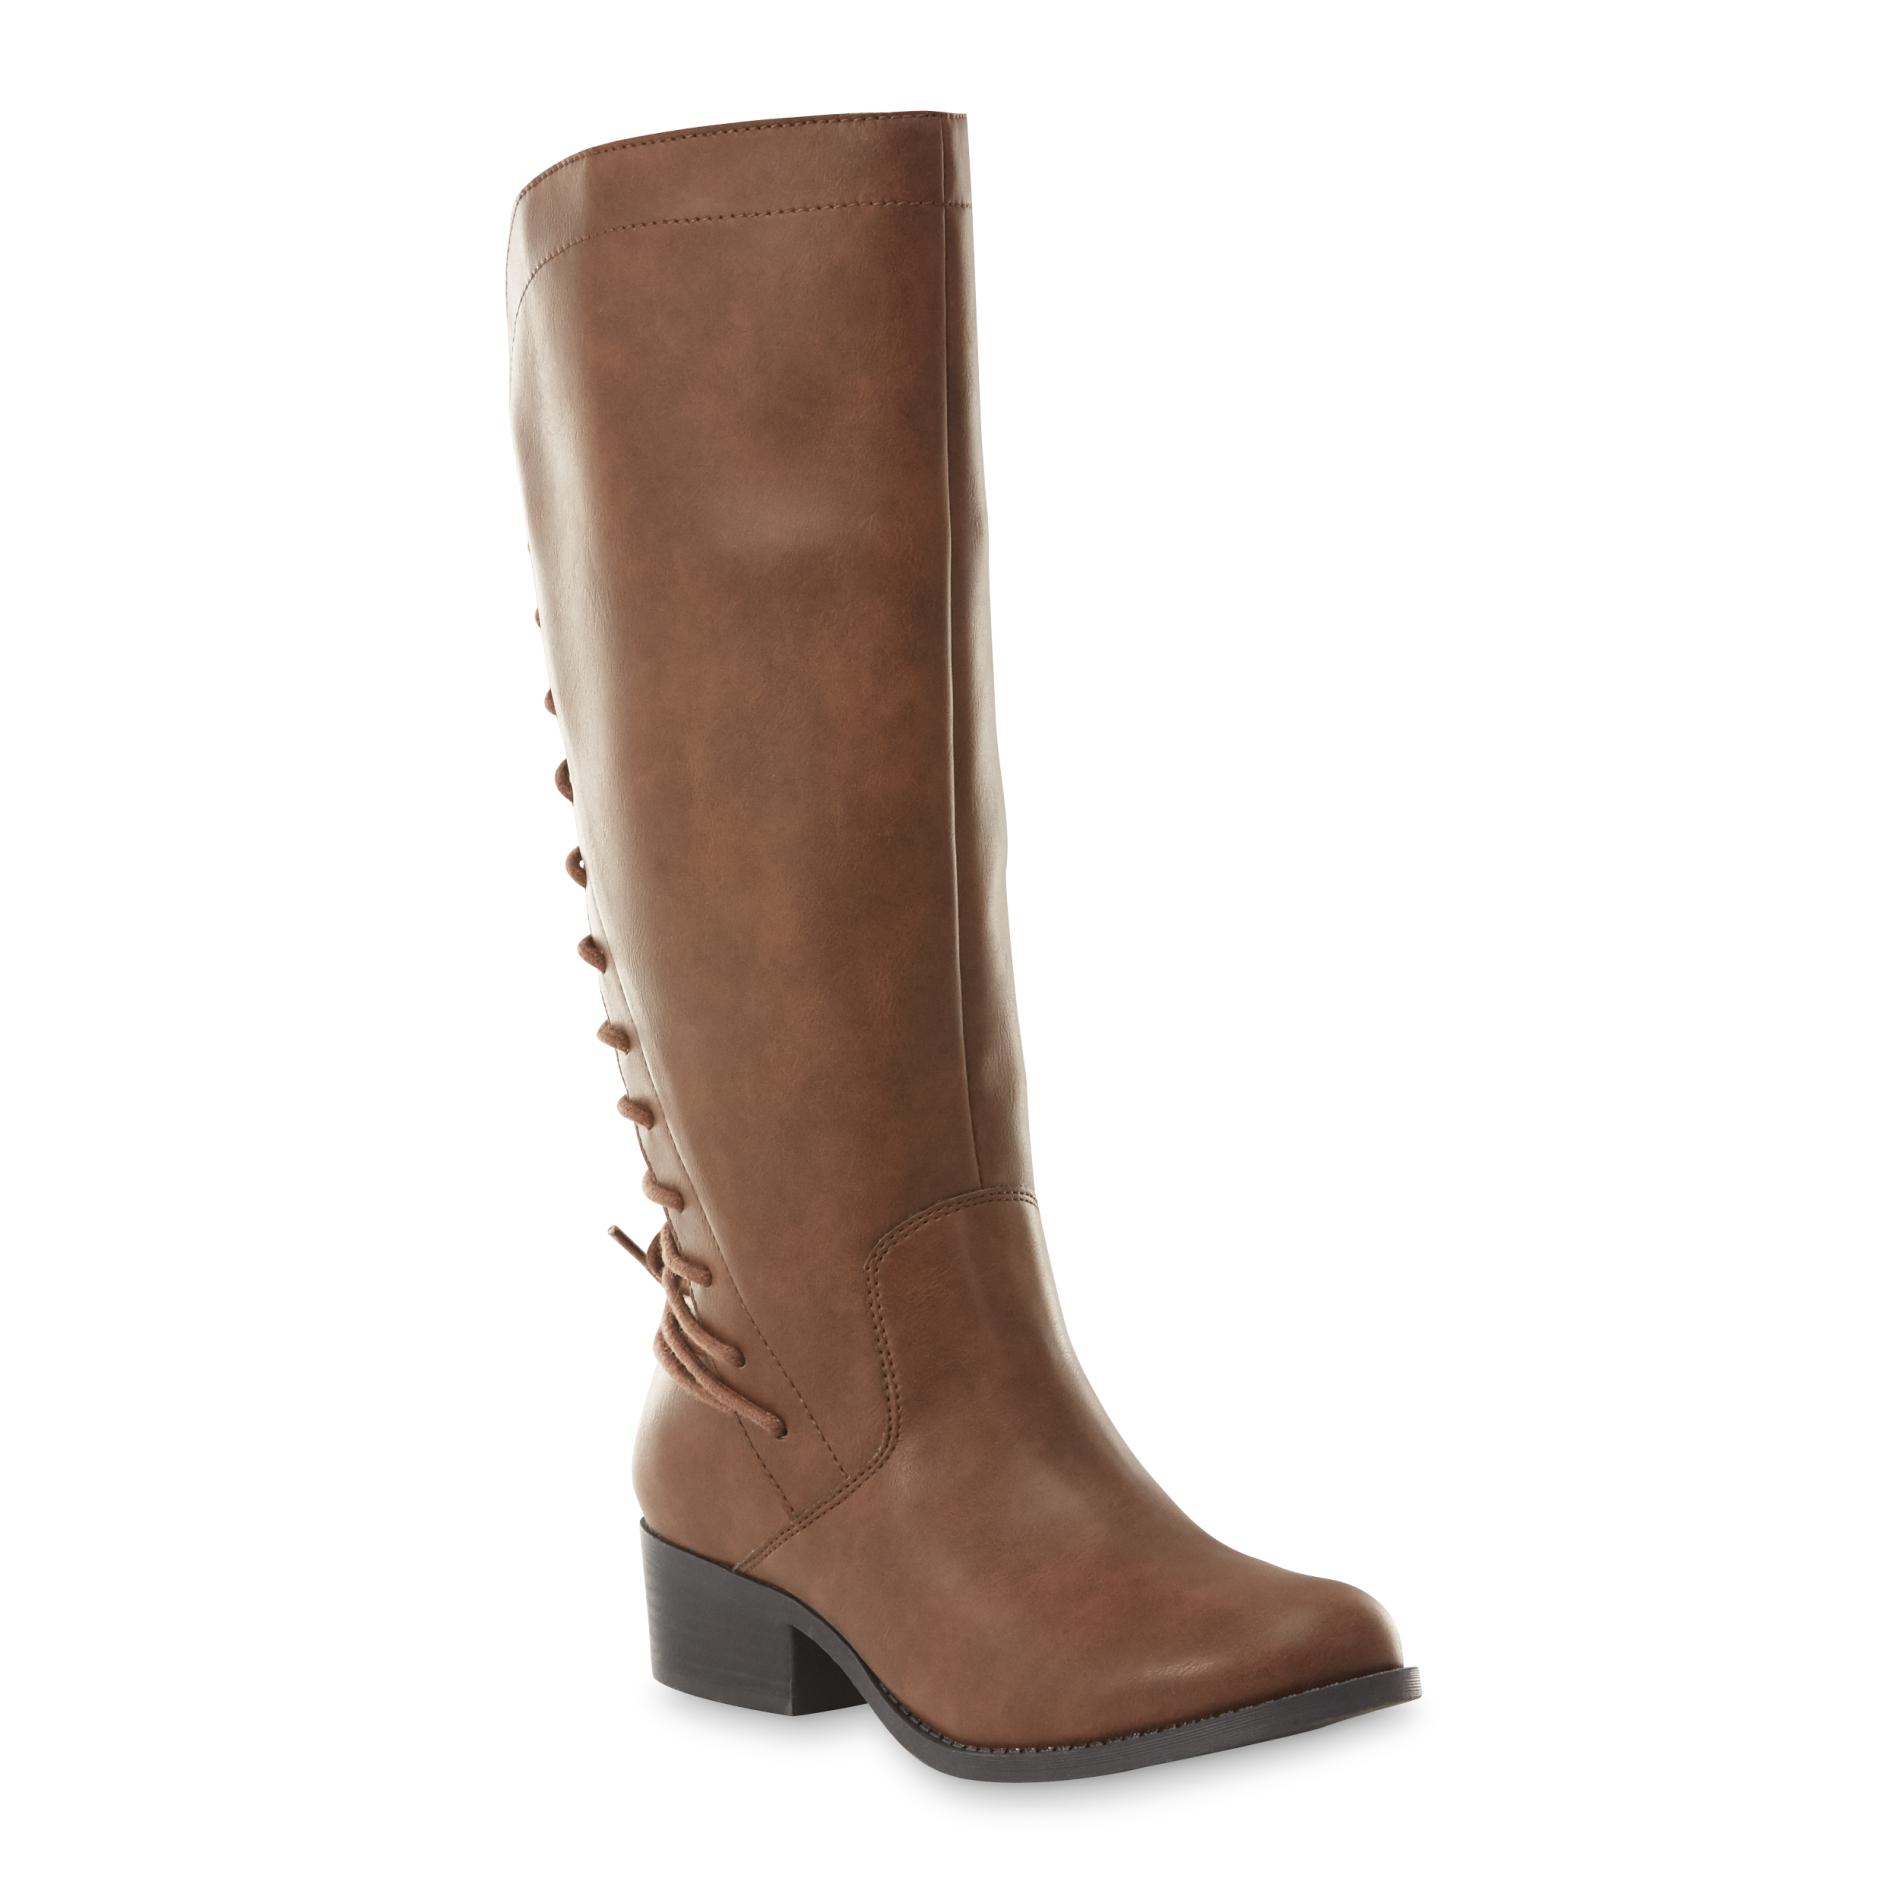 SM Women's Randy Brown Knee-High Fashion Boot - Wide Width Available